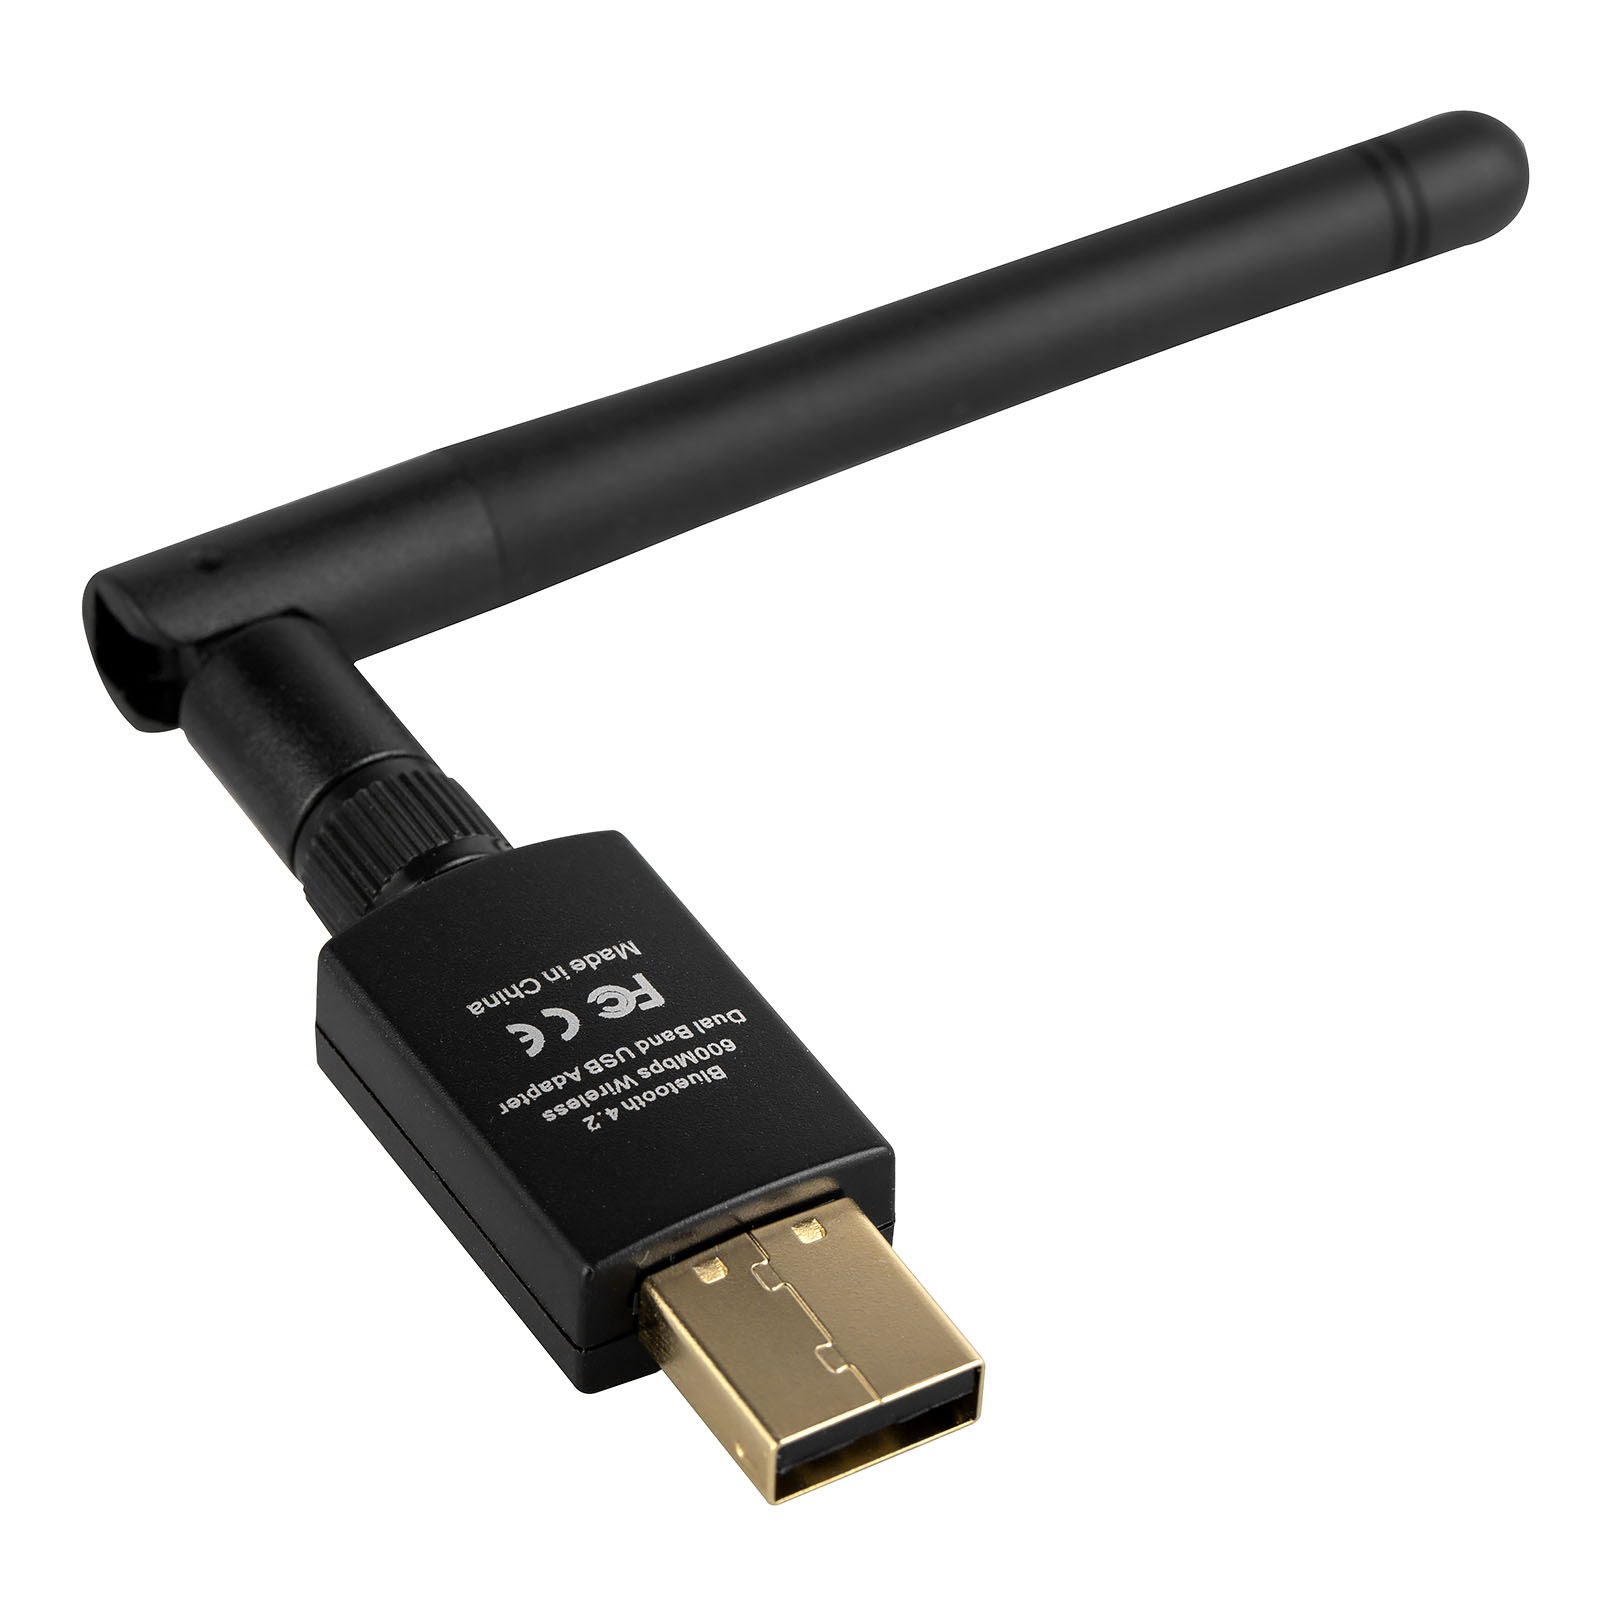 How To Set Up Usb Wifi Adapter